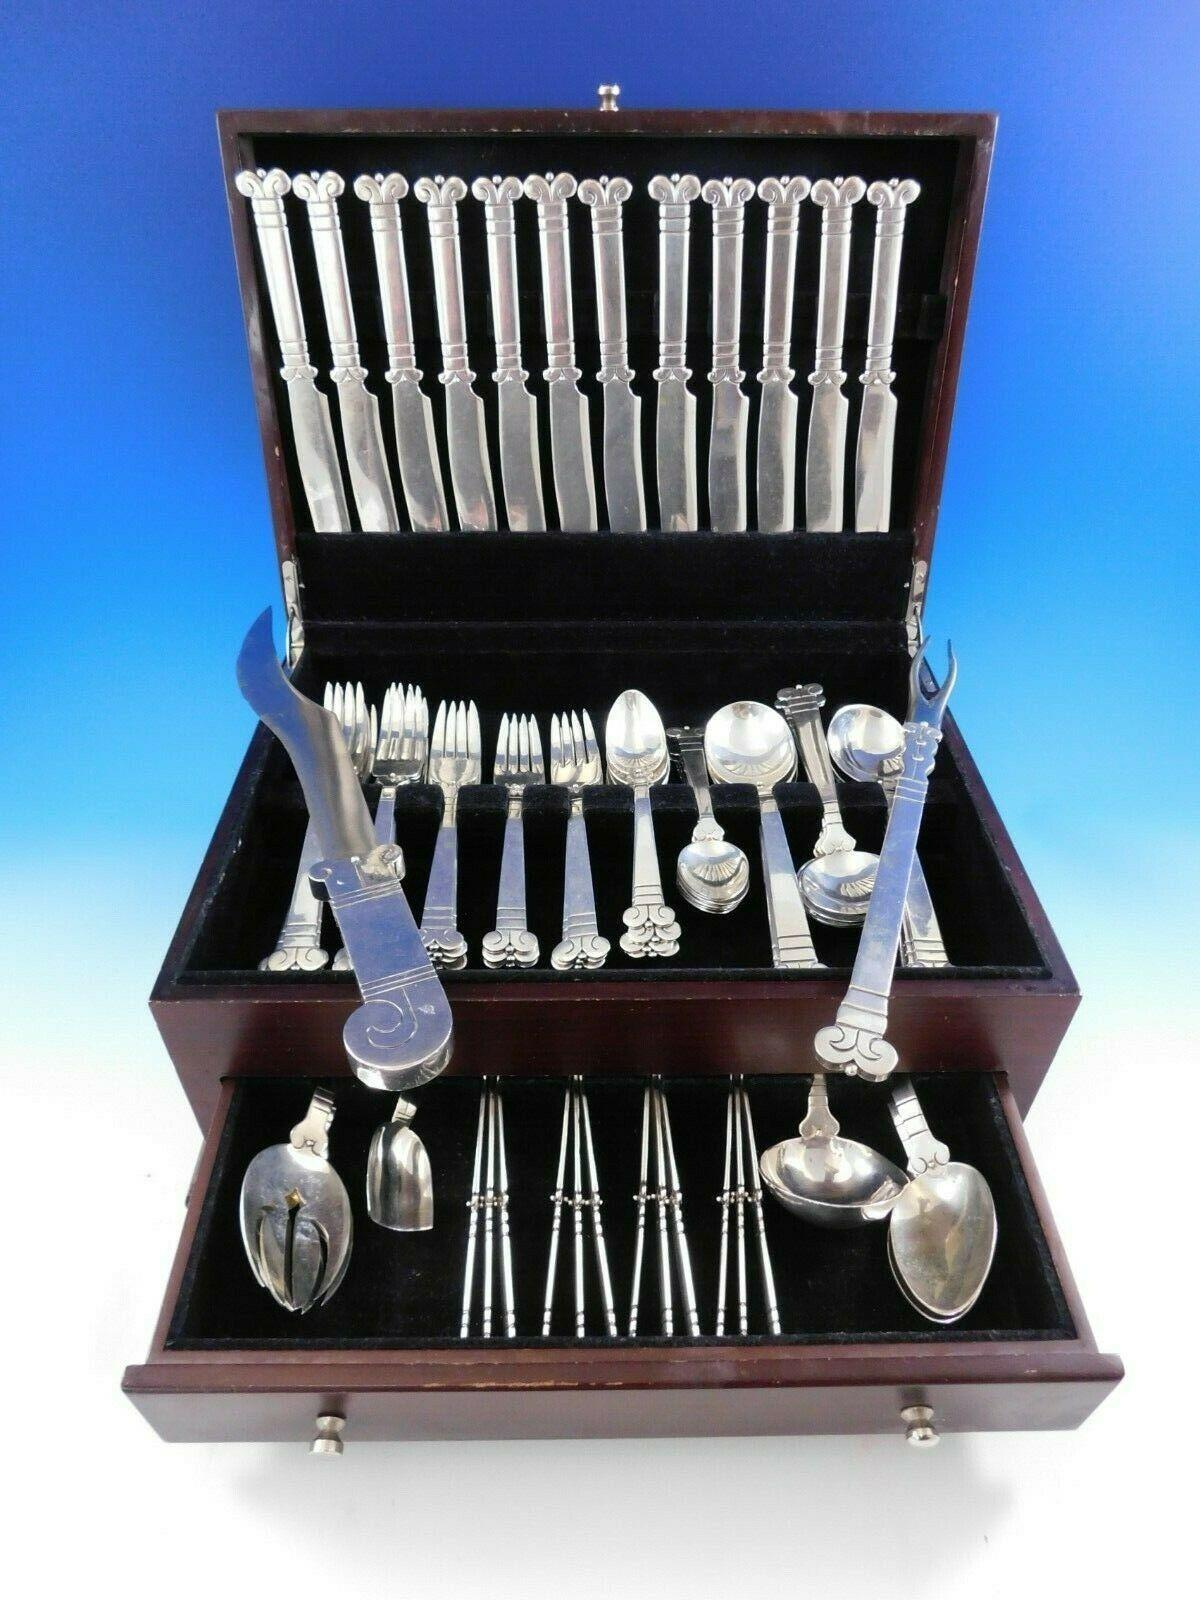 Hector Aguilar

Exceedingly rare 80 piece set of sterling silver flatware by Hector Aguilar, Taxco, Mexico in the scarce “Aztec” pattern, circa 1940-1955. This very handsome design was one of Aguilar's most iconic creations. 

This superb set